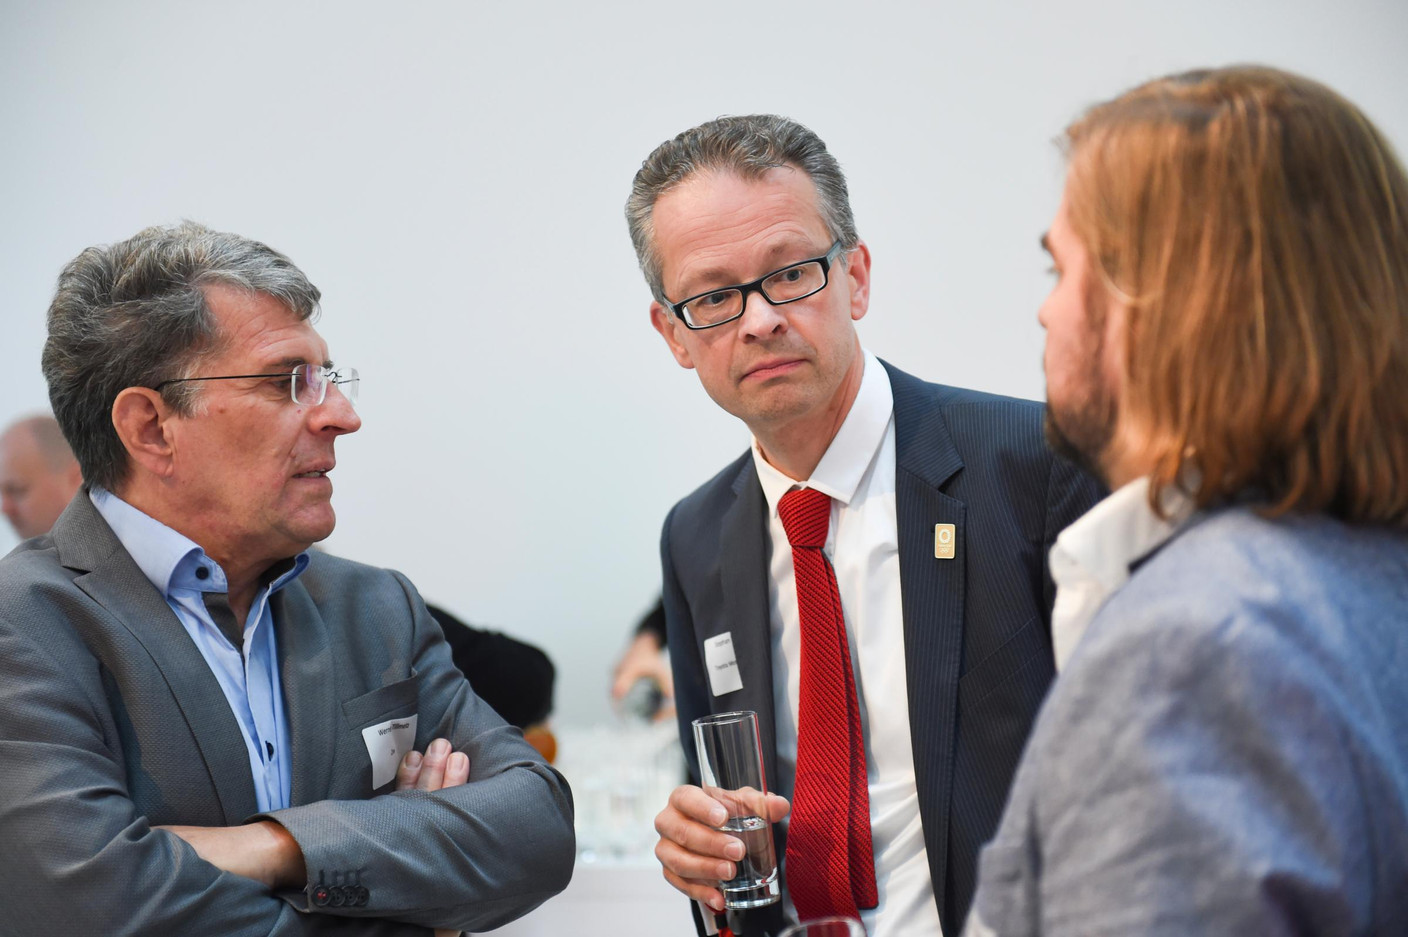 Prof. Dr. Werner Tillmetz (ZSW), Dr Stephan Herbst (Toyota Motor Europe) et Thorsten Herbert (National Organization for Hydrogen and Fuel Cell Technology) (Photo: Total Luxembourg)